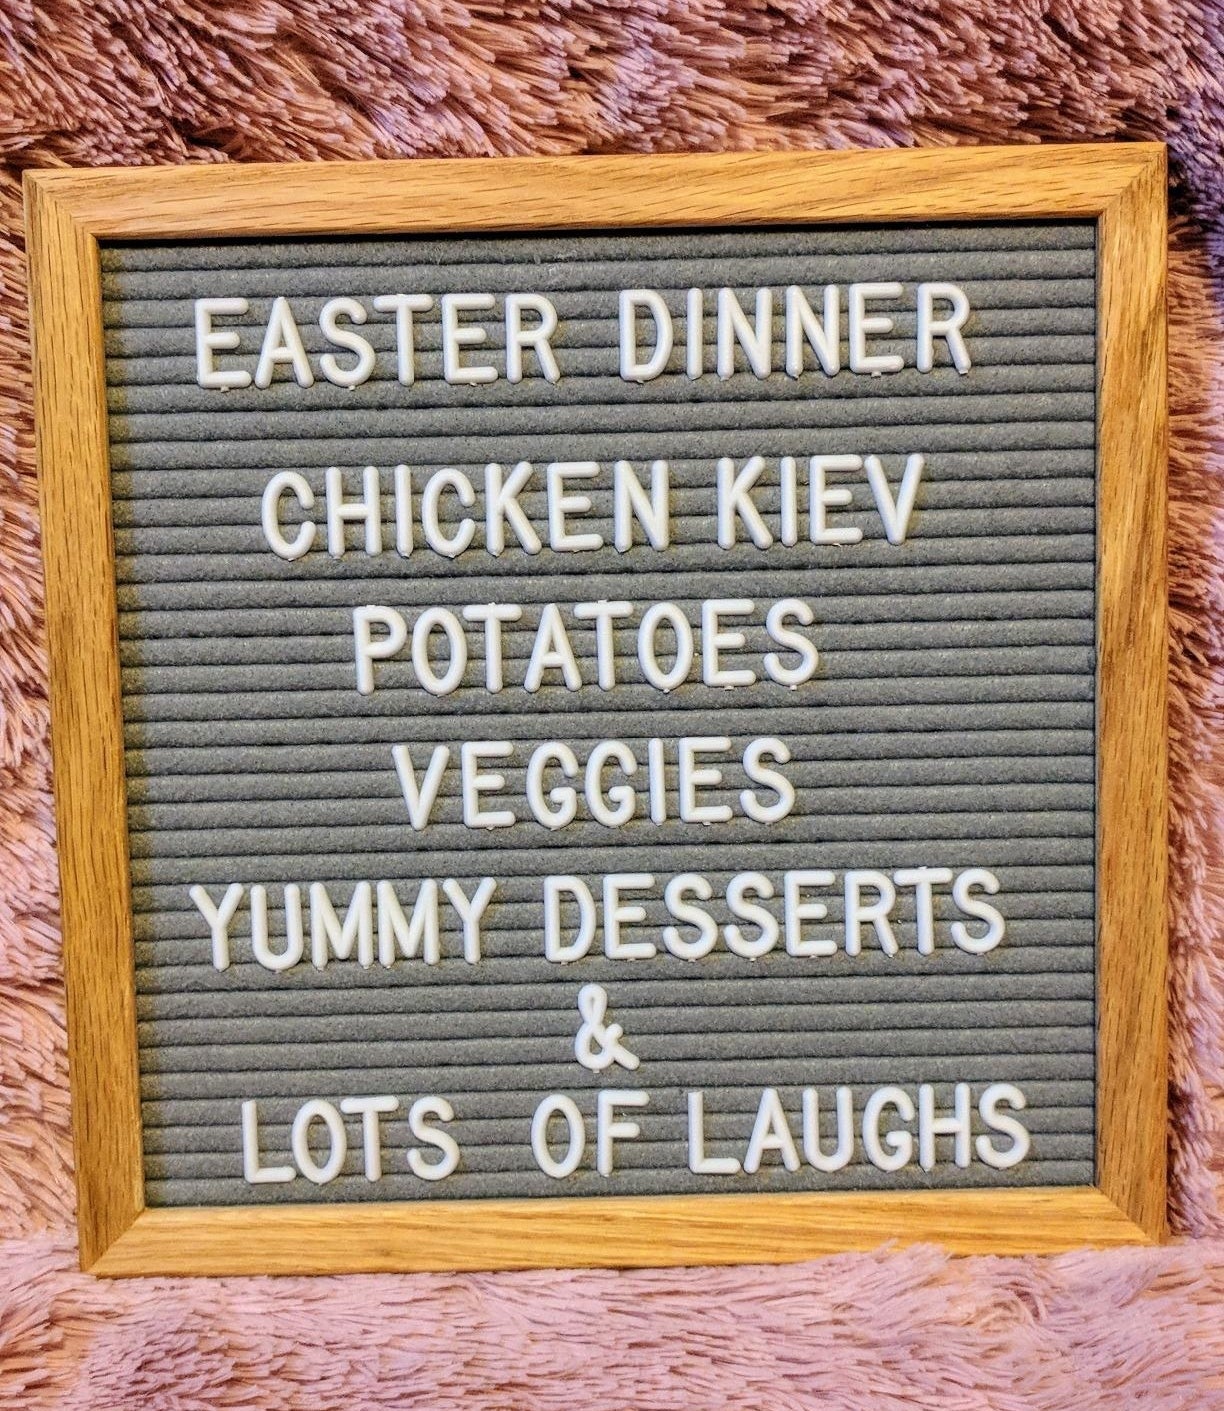 Reviewer photo of the felt letterboard with a menu written out